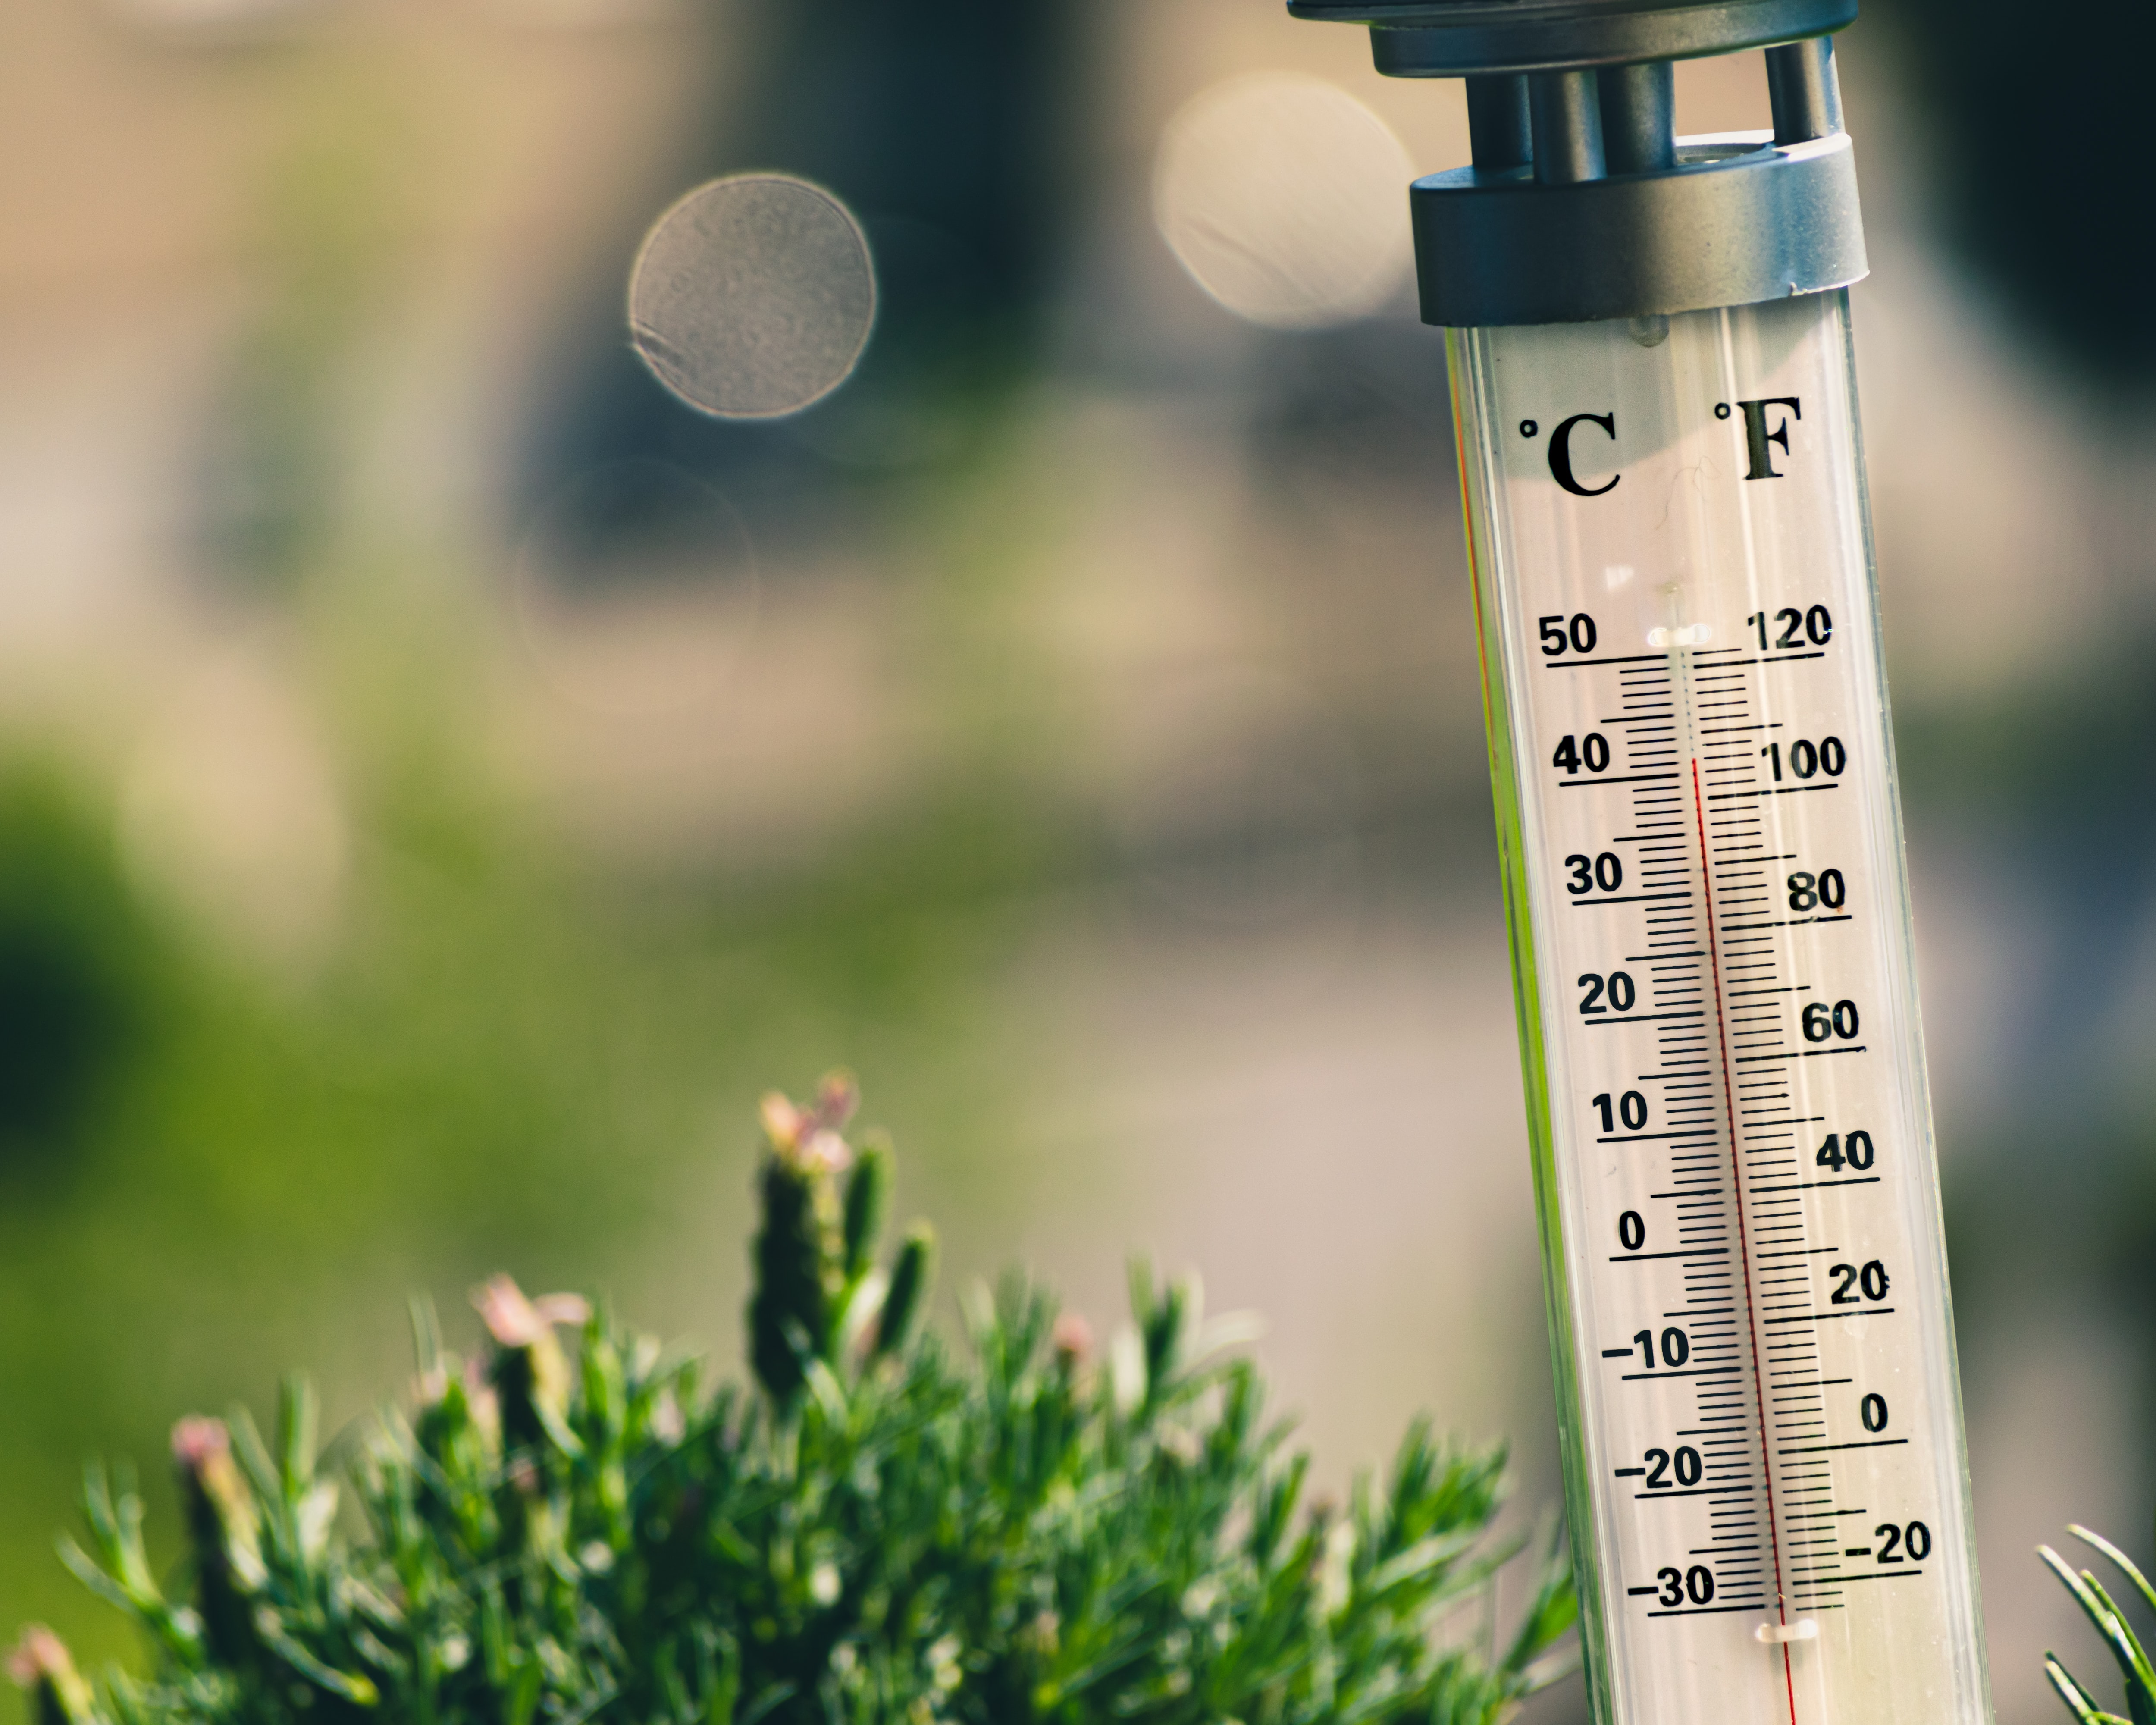 A thermometer reads 42 degrees Celsius next to a plant